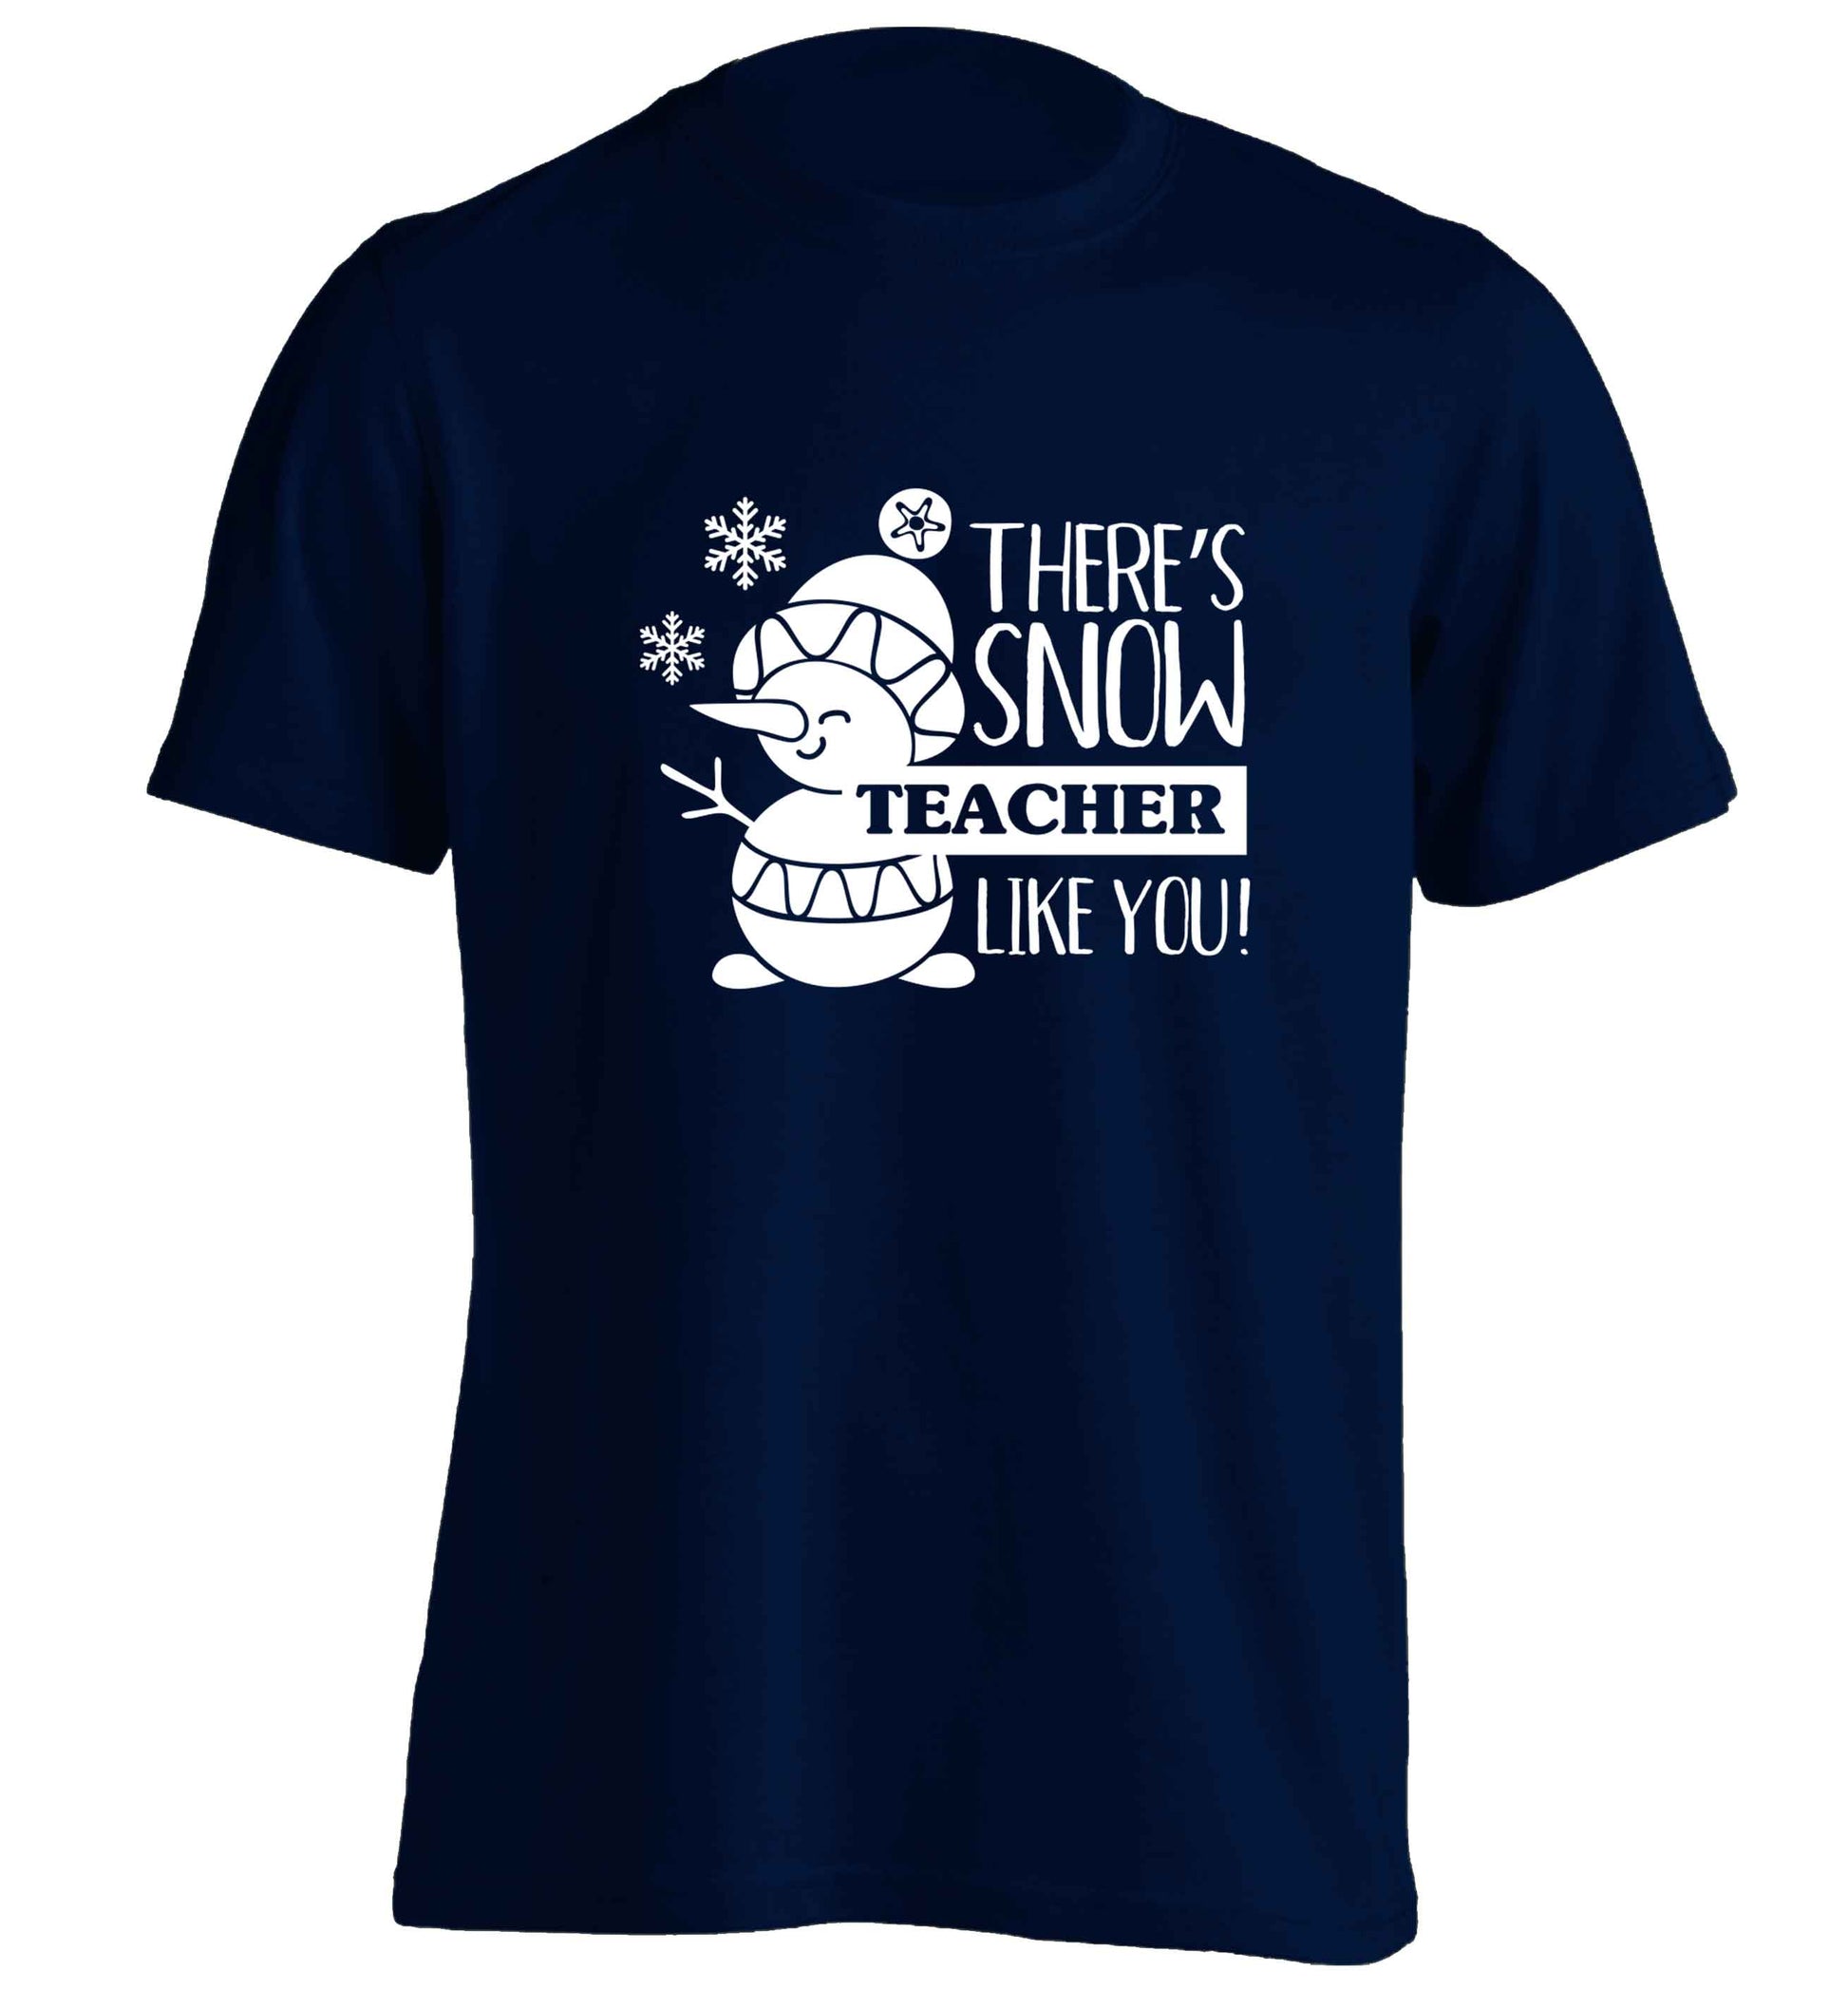 There's snow teacher like you adults unisex navy Tshirt 2XL